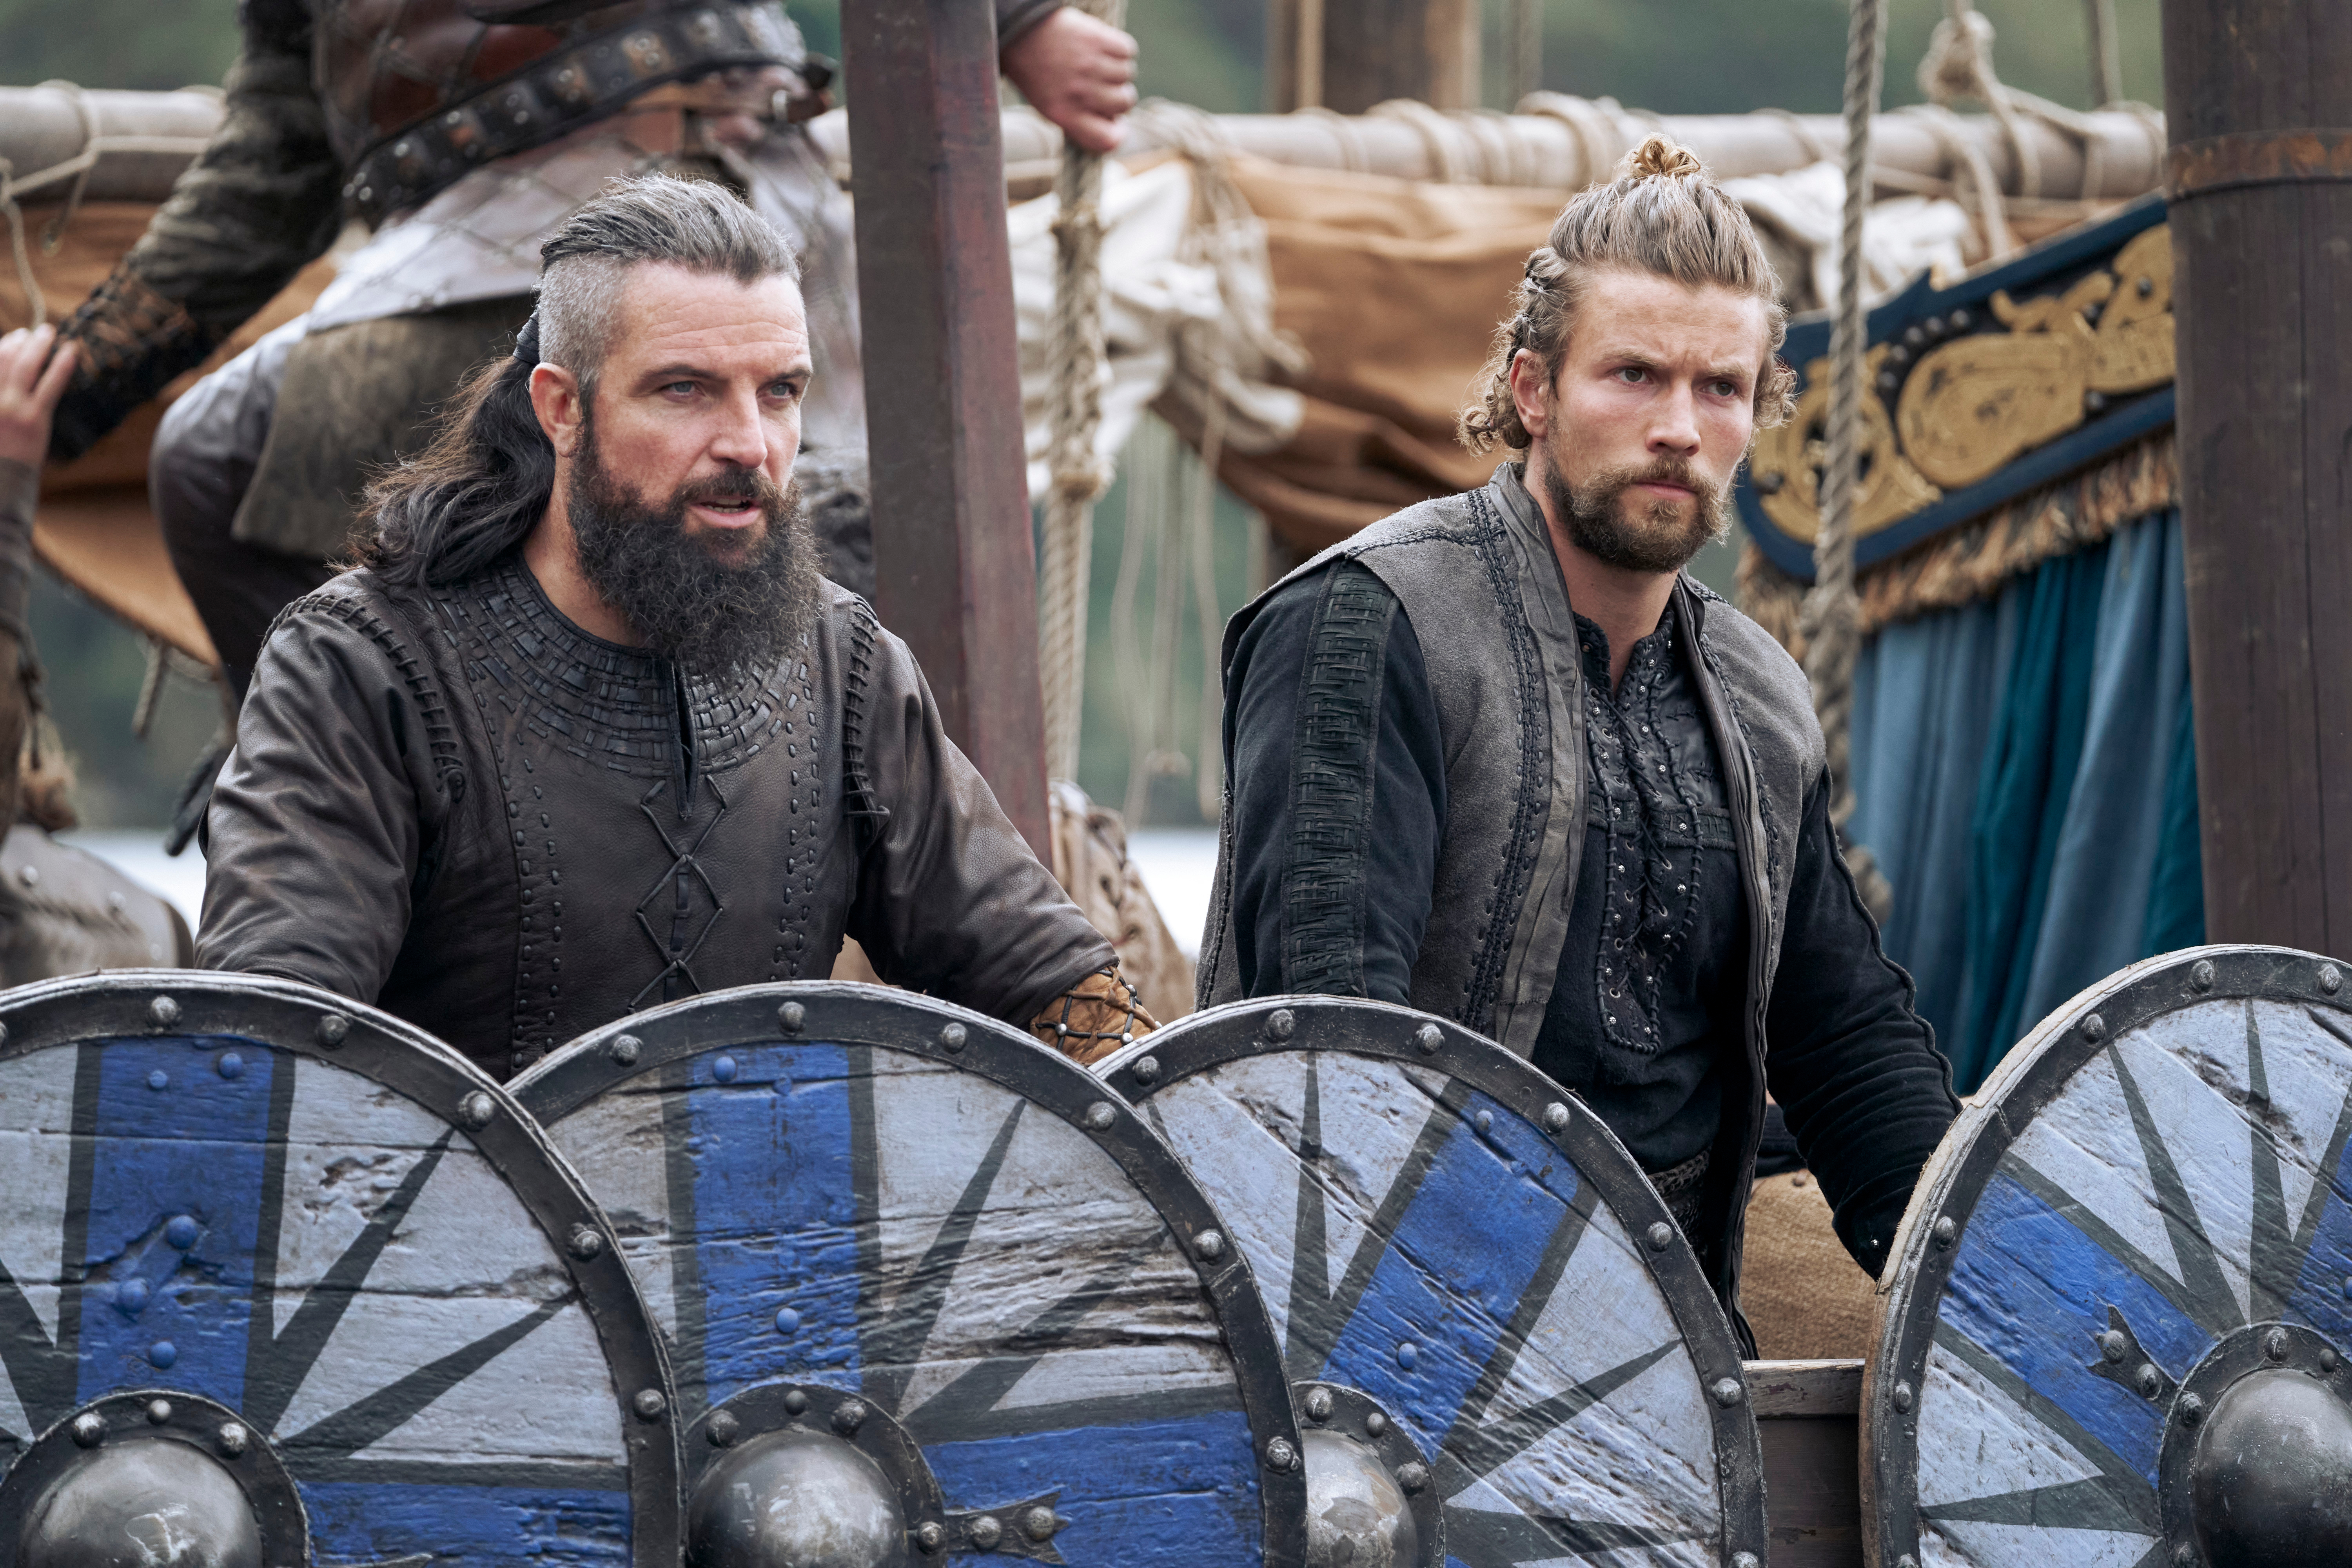 Canute and Harald stand behind their shields on a battlefield in Vikings: Valhalla